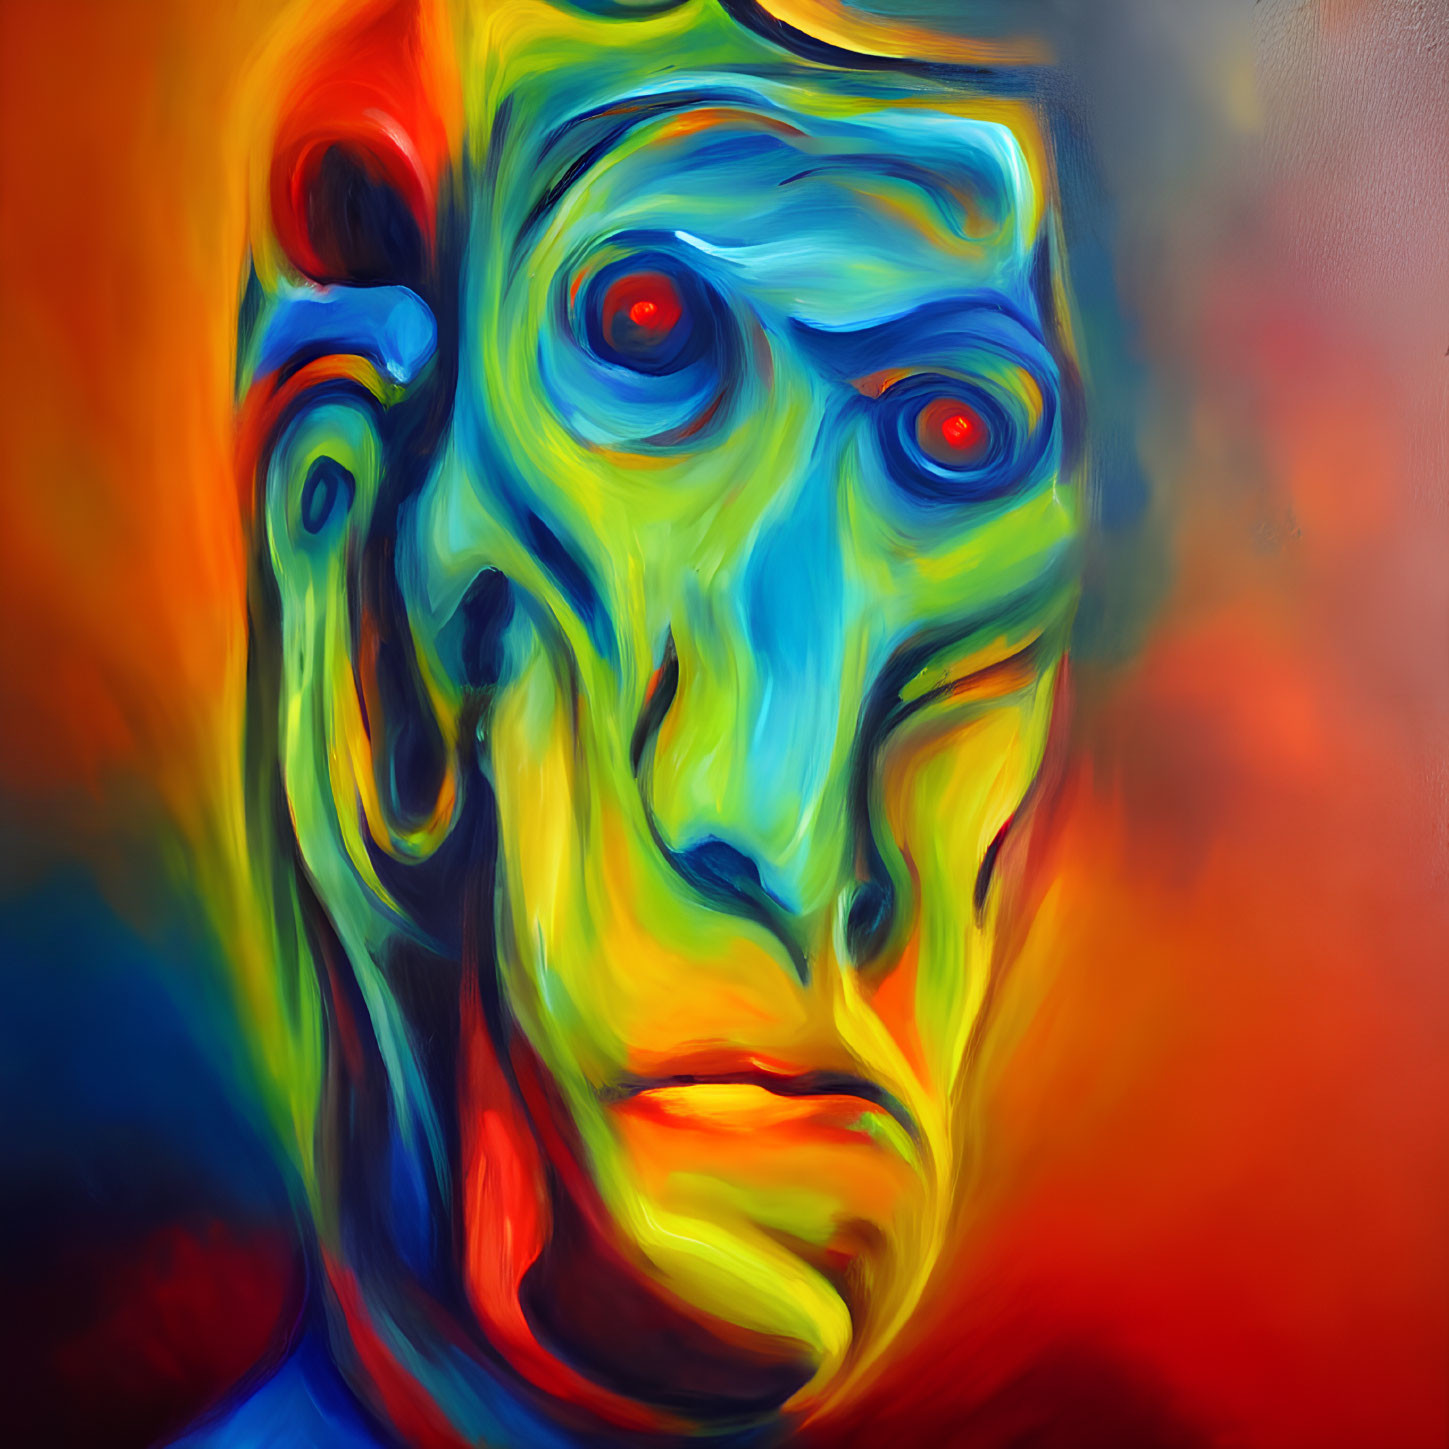 Abstract painting of sorrowful face with intense red eyes on fiery background